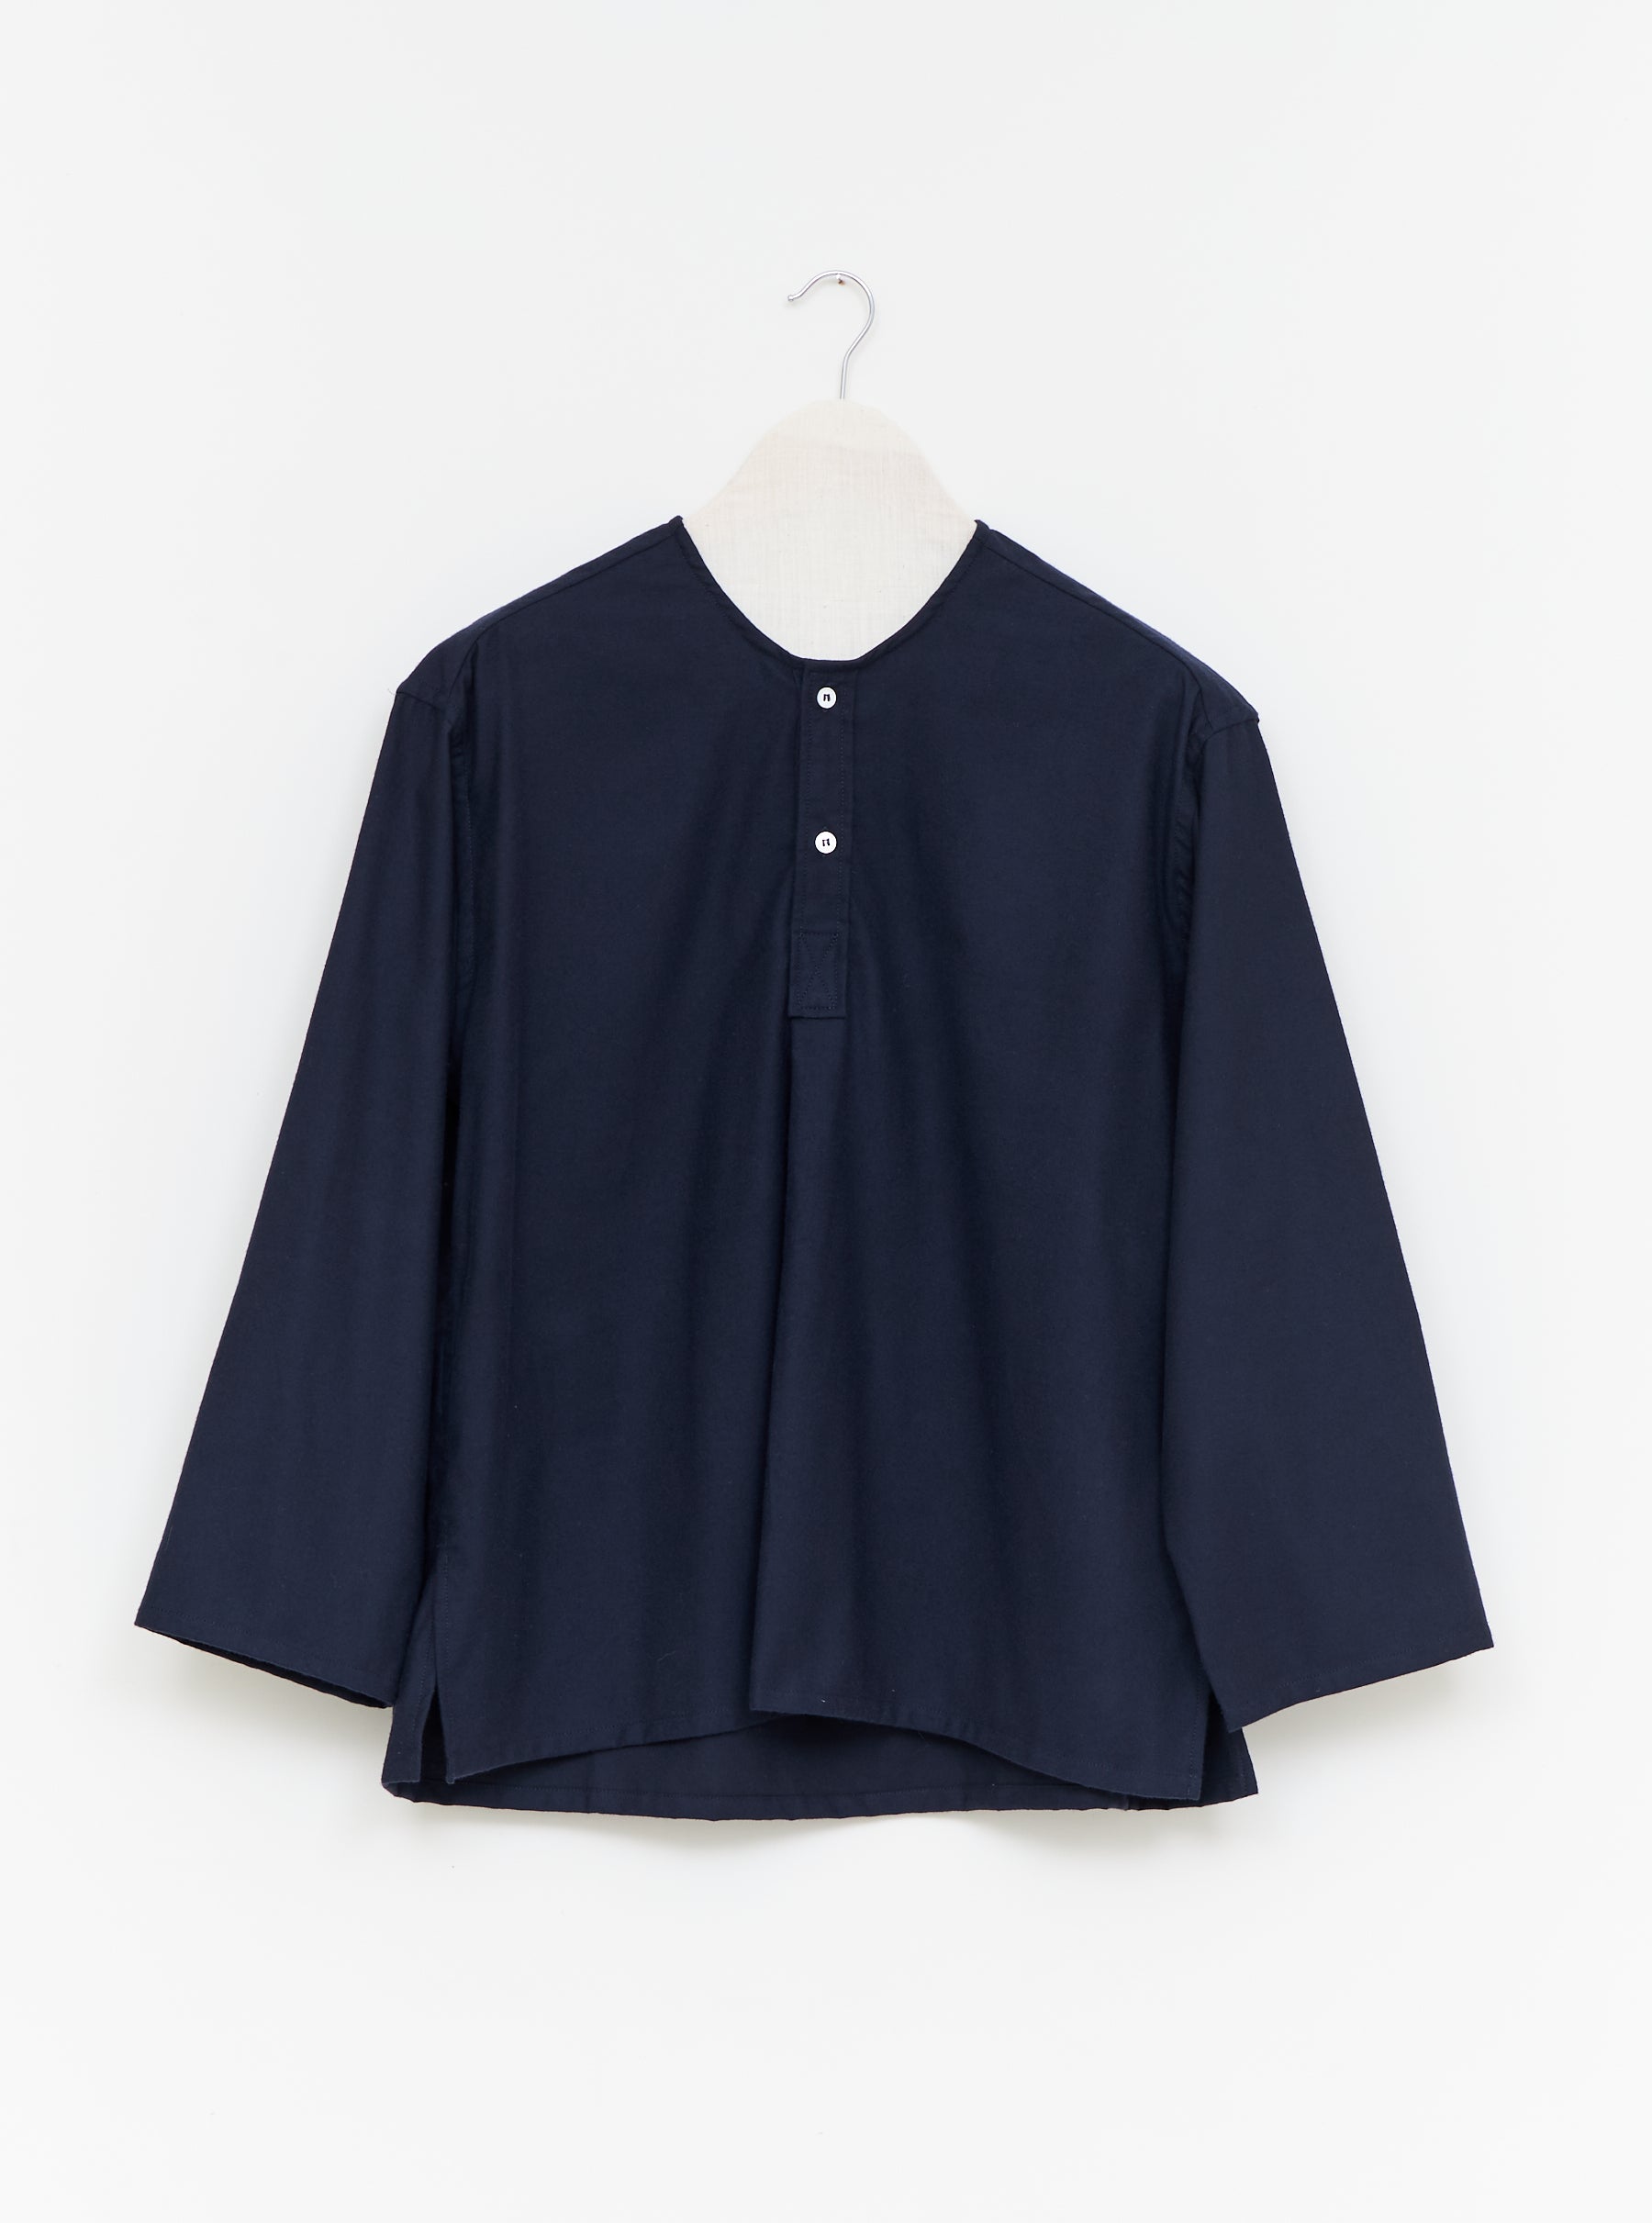 Henley Top in Navy Brushed Cotton – WRIGHT + DOYLE